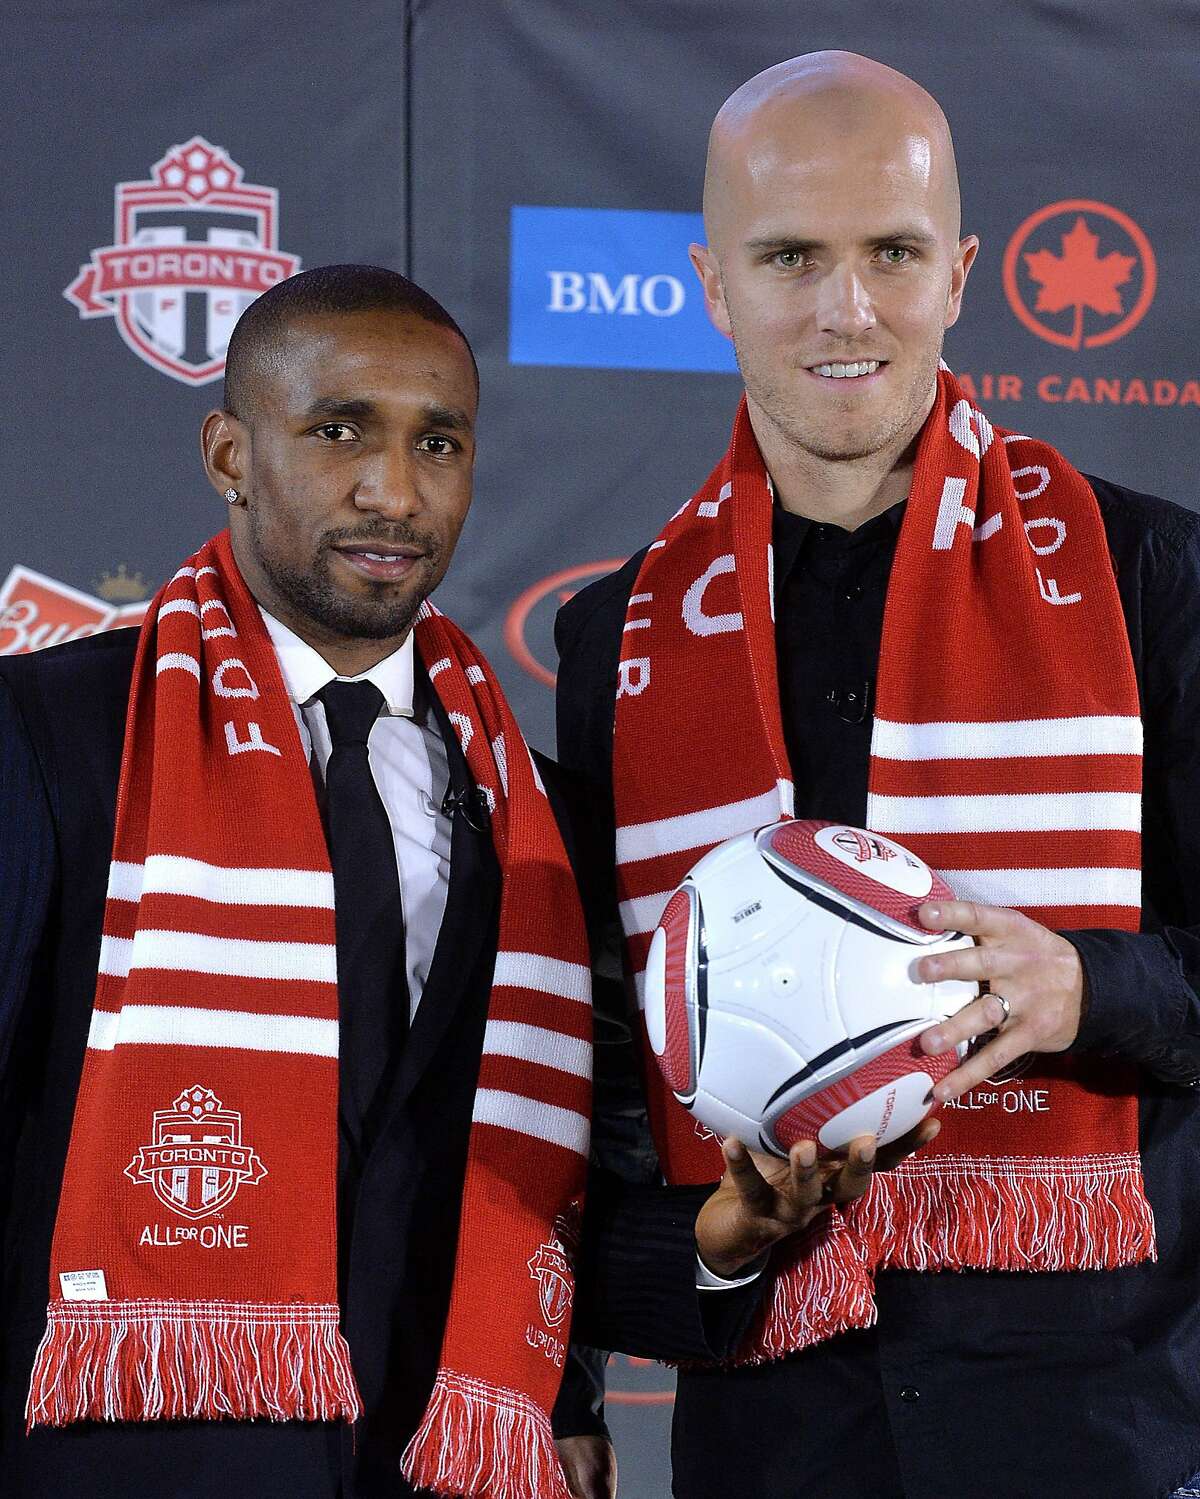 TORONTO, ON - JANUARY 13: Jermain Defoe (L) and Michael Bradley attend a press conference where they were introduced by Toronto FC at Real Sports Bar & Grill on January 13, 2014 in Toronto, Canada. (Photo by Jag Gundu/Getty Images)